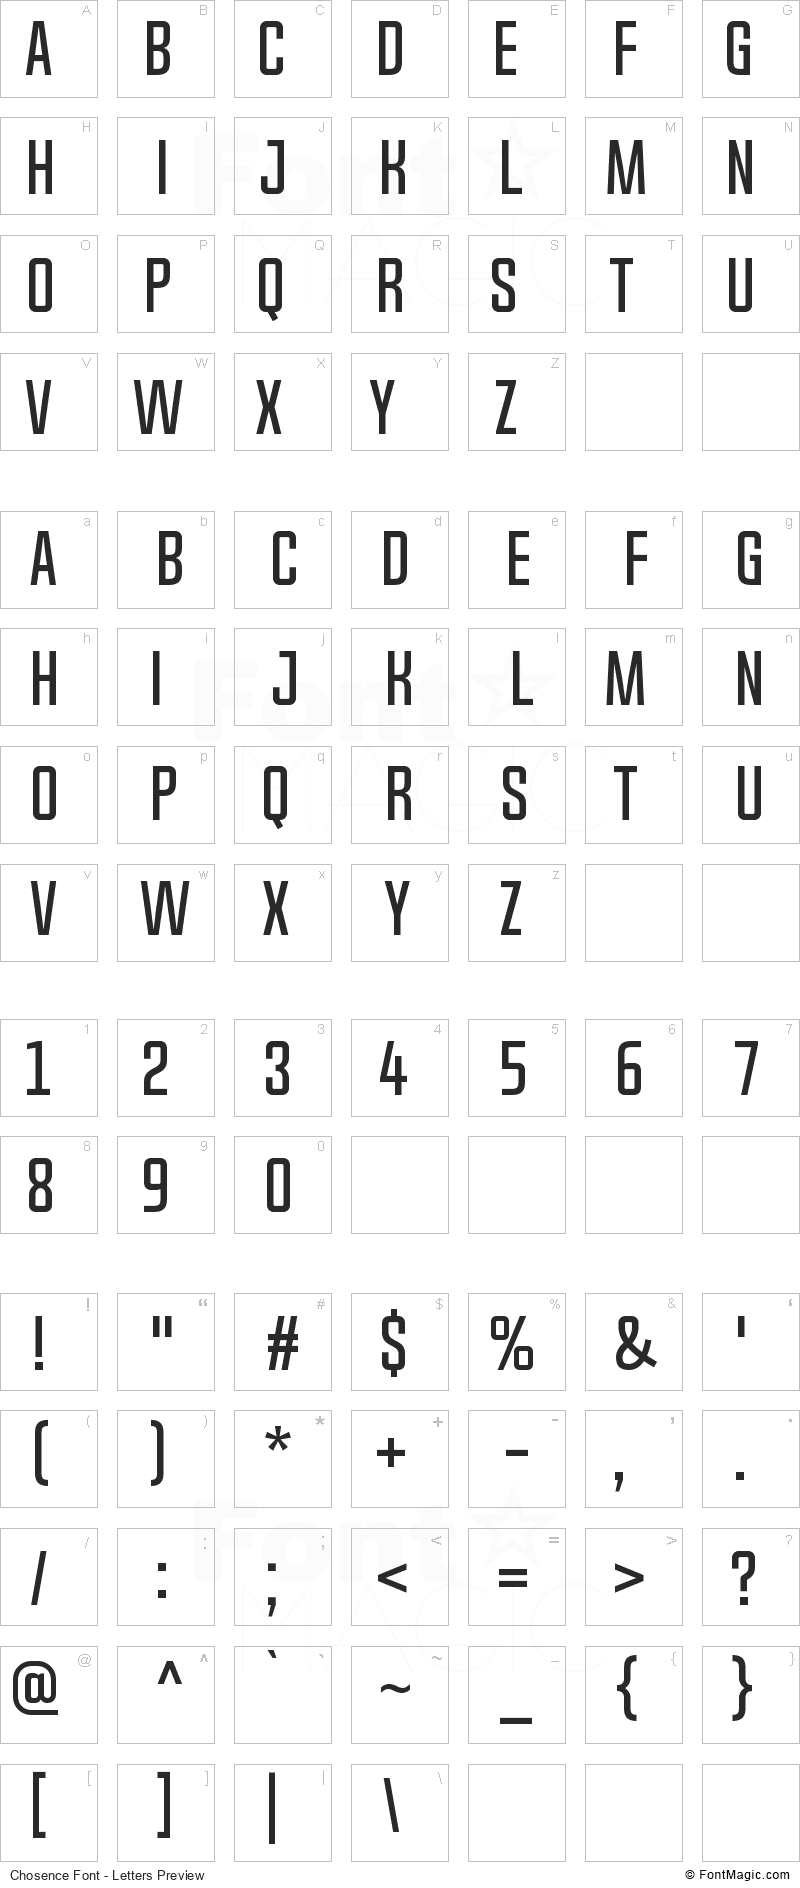 Chosence Font - All Latters Preview Chart